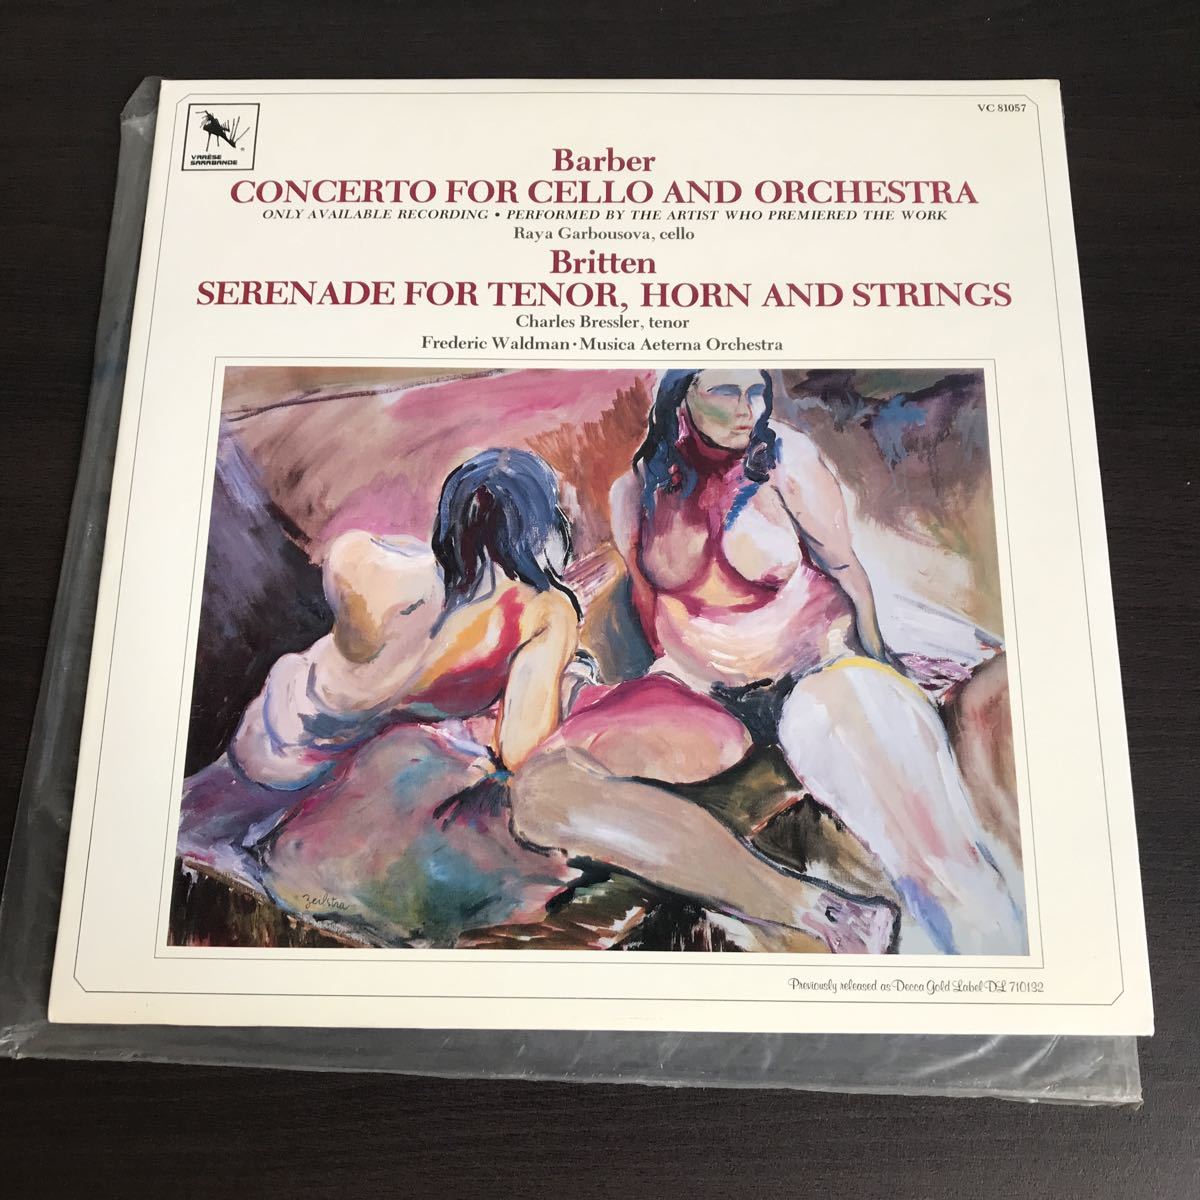 barber concerto for cello and orchestra VC 81057 Britten SERENADE FOR TENOR, HORN AND STRINGS LPレコード_画像4